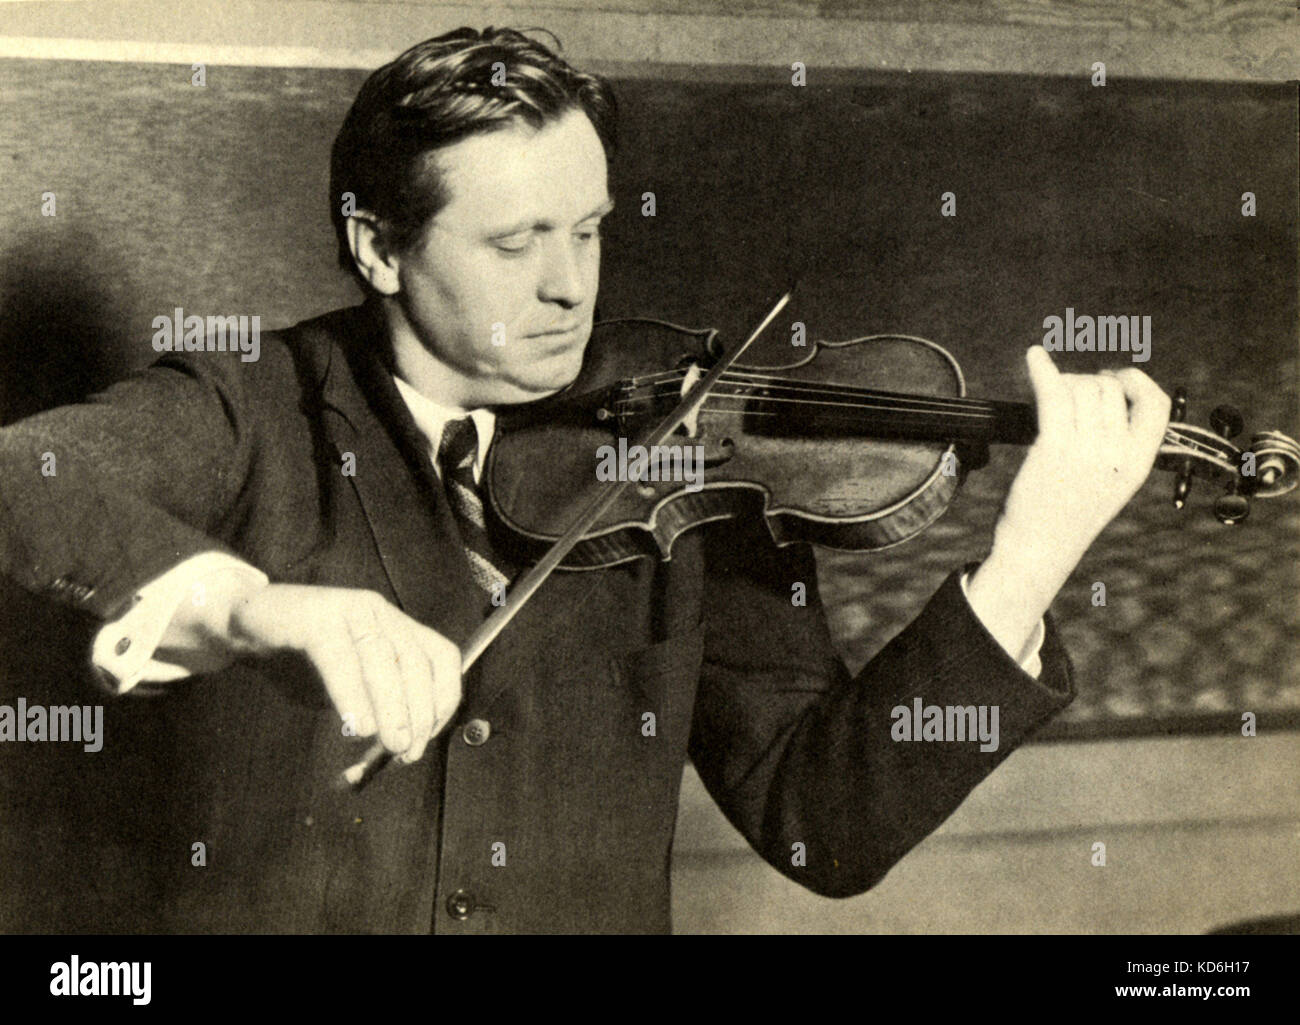 Adolf Busch playing the violin. German violinist and composer (1891-1952).  Photo by Fox. Stock Photo